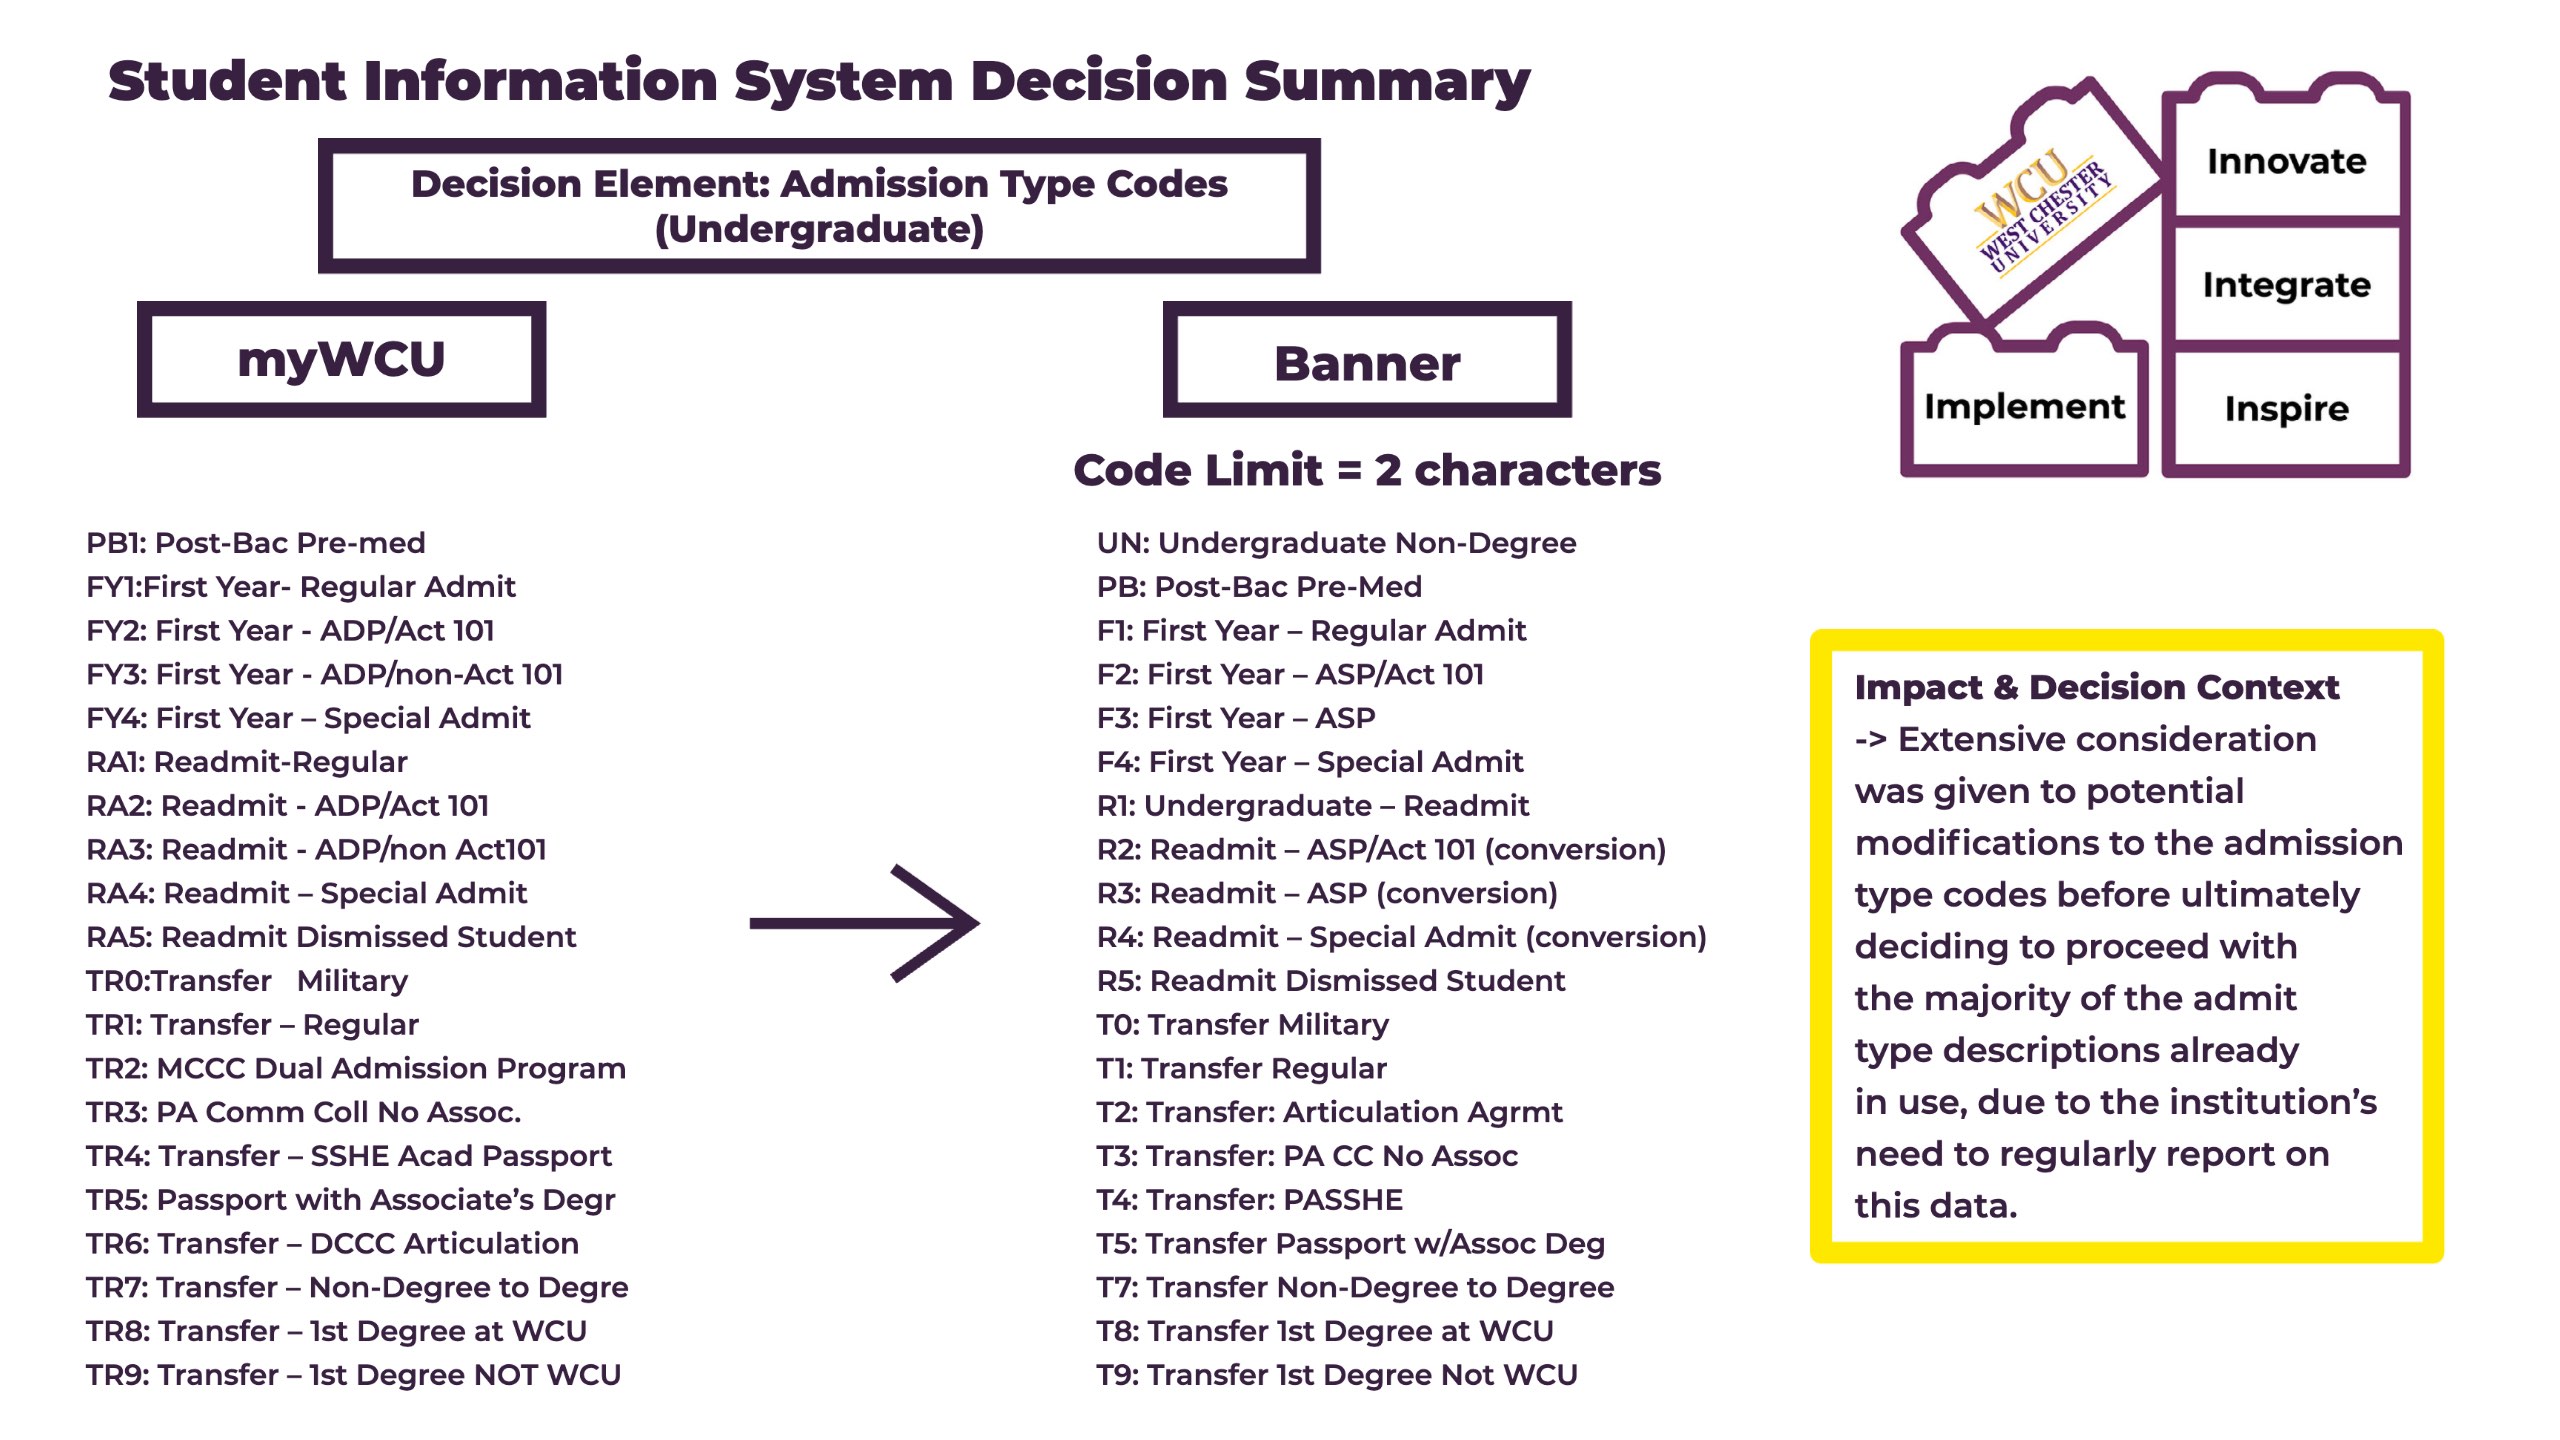   Student Information System Decision Summary Decision Element: Admission Type Codes (Undergraduate) WCU WEST CHESTER UNIVERSITY Innovate myWCU PB1: Post-Bac Pre-med FY1:First Year- Regular Admit FY2: First Year - ADP/Act 101 FY3: First Year - ADP/non-Act 101 FY4: First Year - Special Admit RA1: Readmit-Regular RA2: Readmit - ADP/Act 101 RA3: Readmit - ADP/non Act101 RA4: Readmit - Special Admit RA5: Readmit Dismissed Student TRO:Transfer Military TR1: Transfer - Regular TR2: MCCC Dual Admission Program TR3: PA Comm Coll No Assoc. TR4: Transfer - SSHE Acad Passport TR5: Passport with Associate's Degr TR6: Transfer - DCCC Articulation TR7: Transfer - Non-Degree to Degre TR8: Transfer - 1st Degree at WCU TR9: Transfer - 1st Degree NOT WCU ↑ Banner Code Limit = 2 characters UN: Undergraduate Non-Degree PB: Post-Bac Pre-Med F1: First Year - Regular Admit F2: First Year - ASP/Act 101 F3: First Year - ASP F4: First Year - Special Admit R1: Undergraduate - Readmit R2: Readmit - ASP/Act 101 (conversion) R3: Readmit - ASP (conversion) R4: Readmit - Special Admit (conversion) R5: Readmit Dismissed Student TO: Transfer Military T1: Transfer Regular T2: Transfer: Articulation Agrmt T3: Transfer: PA CC No Assoc T4: Transfer: PASSHE T5: Transfer Passport w/Assoc Deg T7: Transfer Non-Degree to Degree T8: Transfer 1st Degree at WCU T9: Transfer 1st Degree Not WCU Integrate Implement Inspire Impact & Decision Context -> Extensive consideration was given to potential modifications to the admission type codes before ultimately deciding to proceed with the majority of the admit type descriptions already in use, due to the institution's need to regularly report on this data.